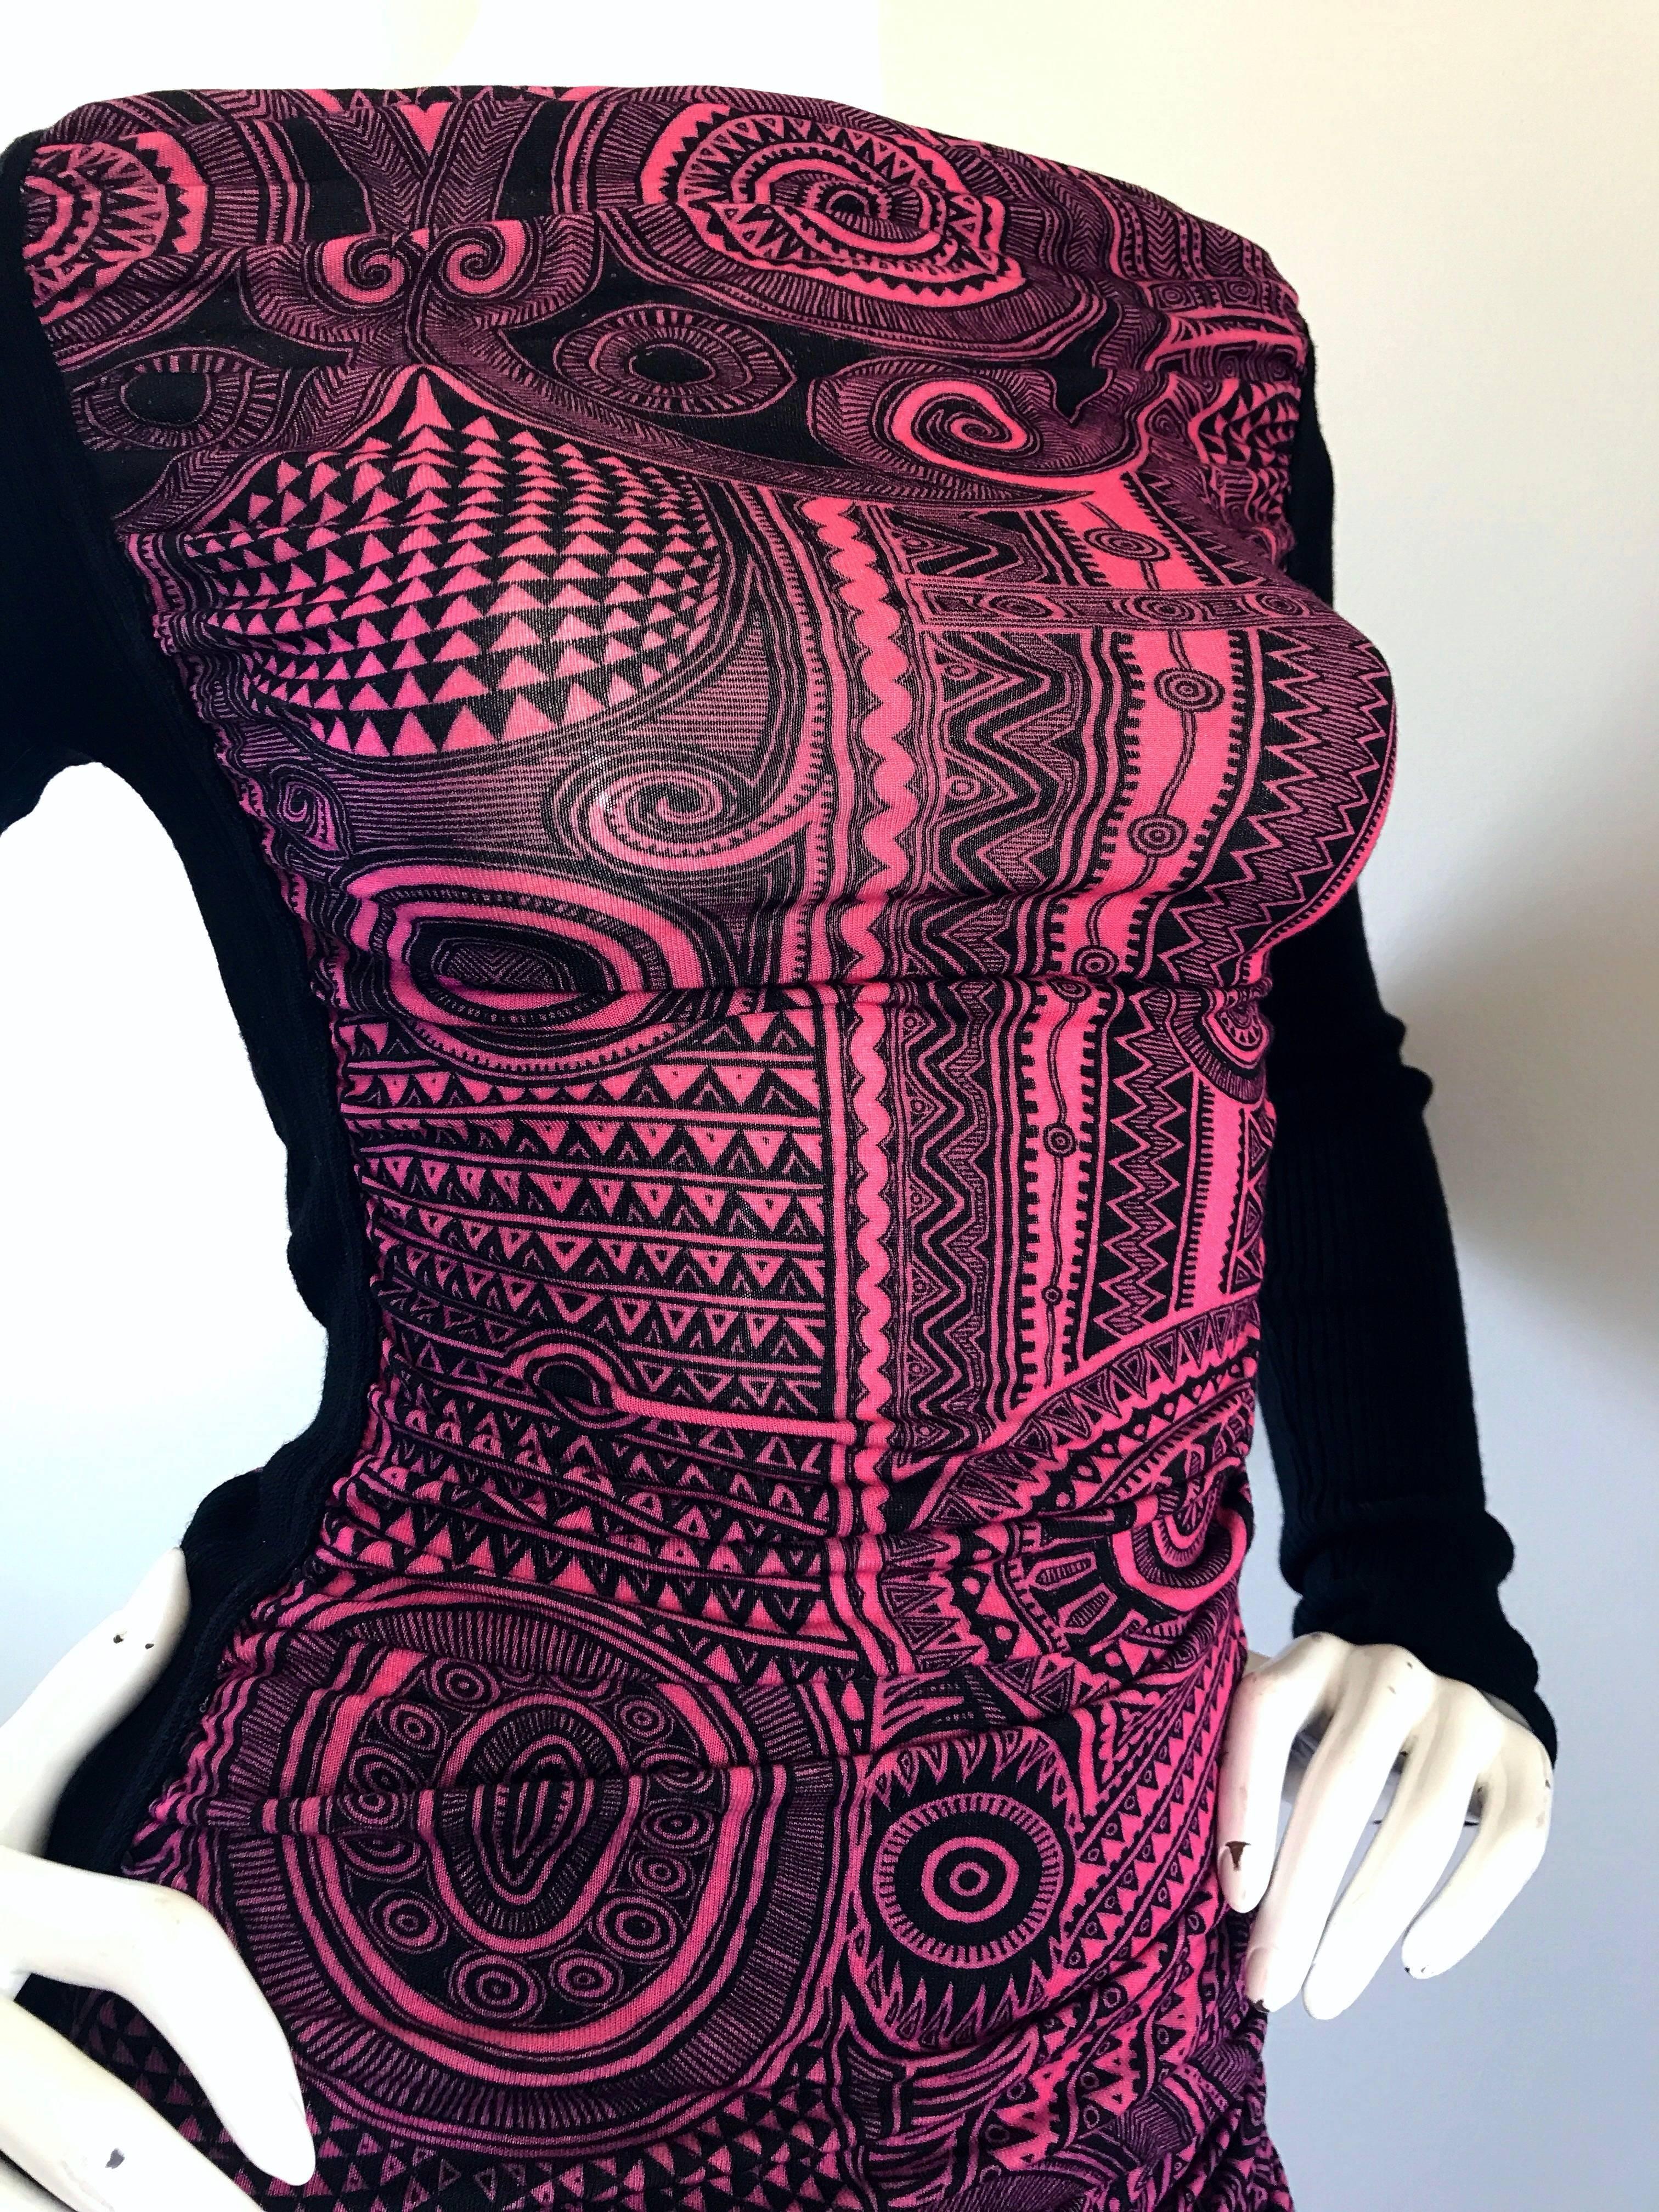 Rare 1990s JEAN PAUL GAUTLIER hot pink and black Aztec zodiac print top and skirt set! Features a vibrant hot pink and black Aztec zodiac print throughout. Soft stretchy rayon fabric with black virgin wool panels at each side of the blouse and